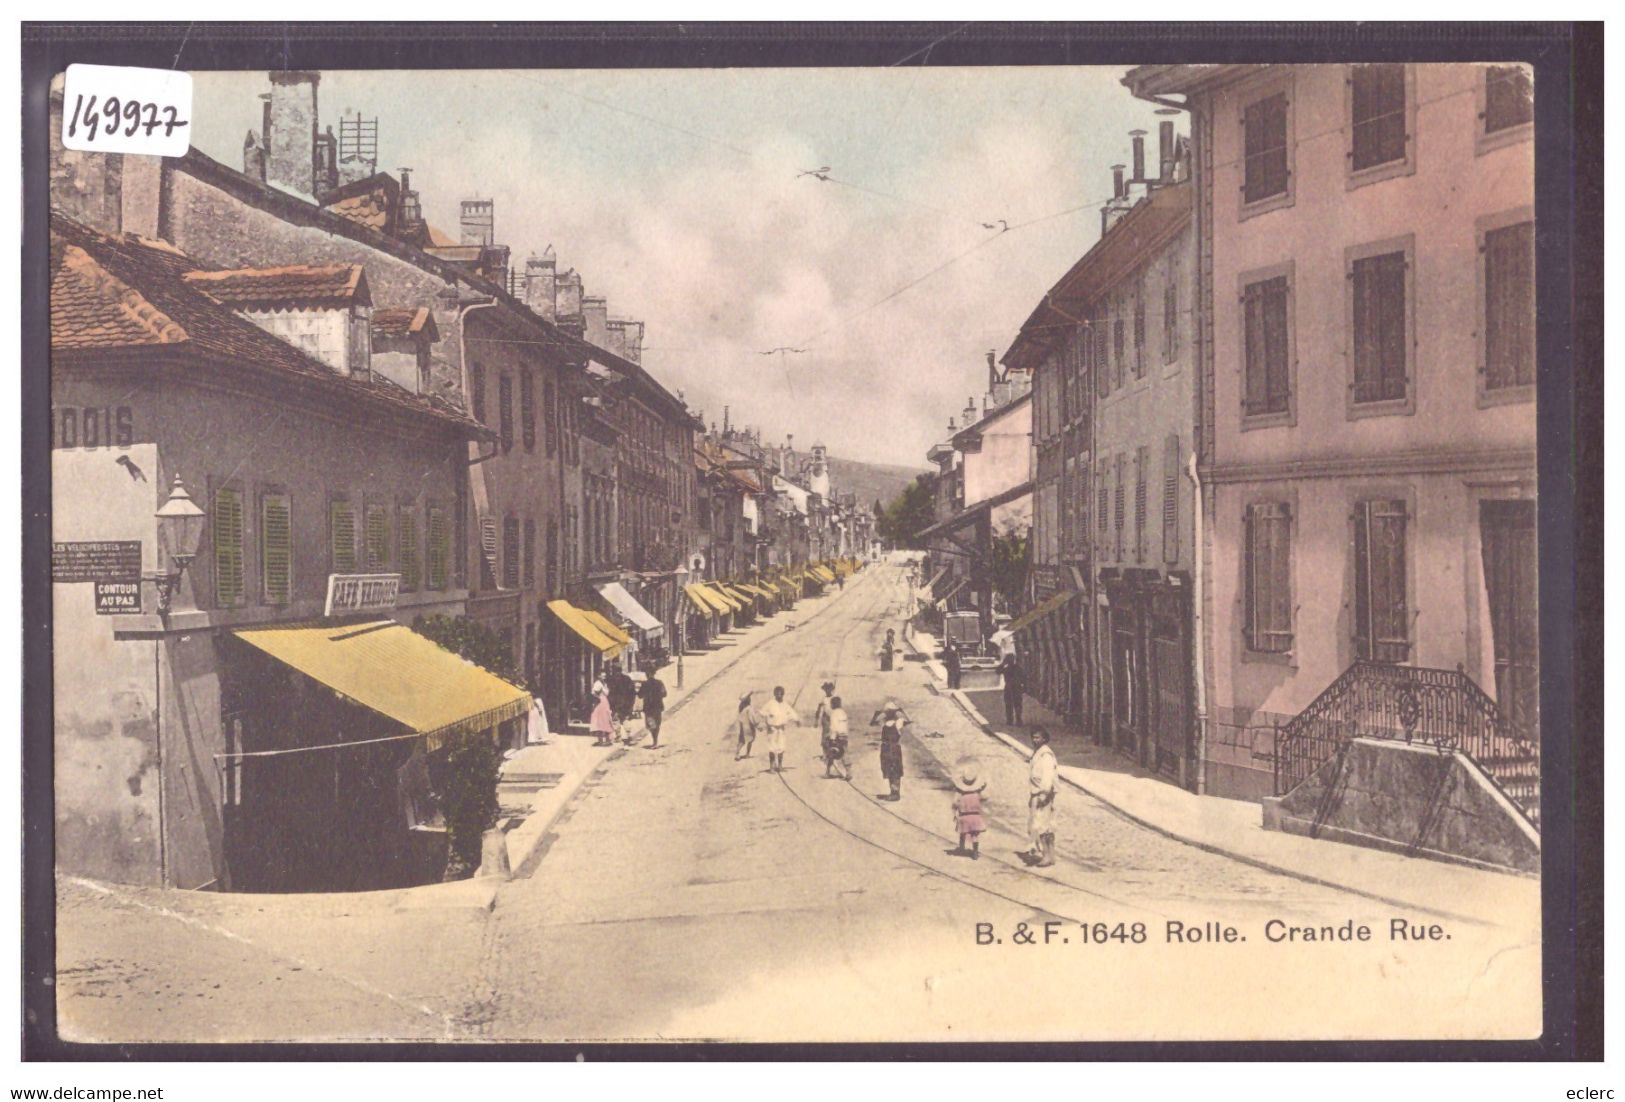 DISTRICT DE ROLLE - ROLLE - B ( FORT PLI D'ANGLE ) - Rolle